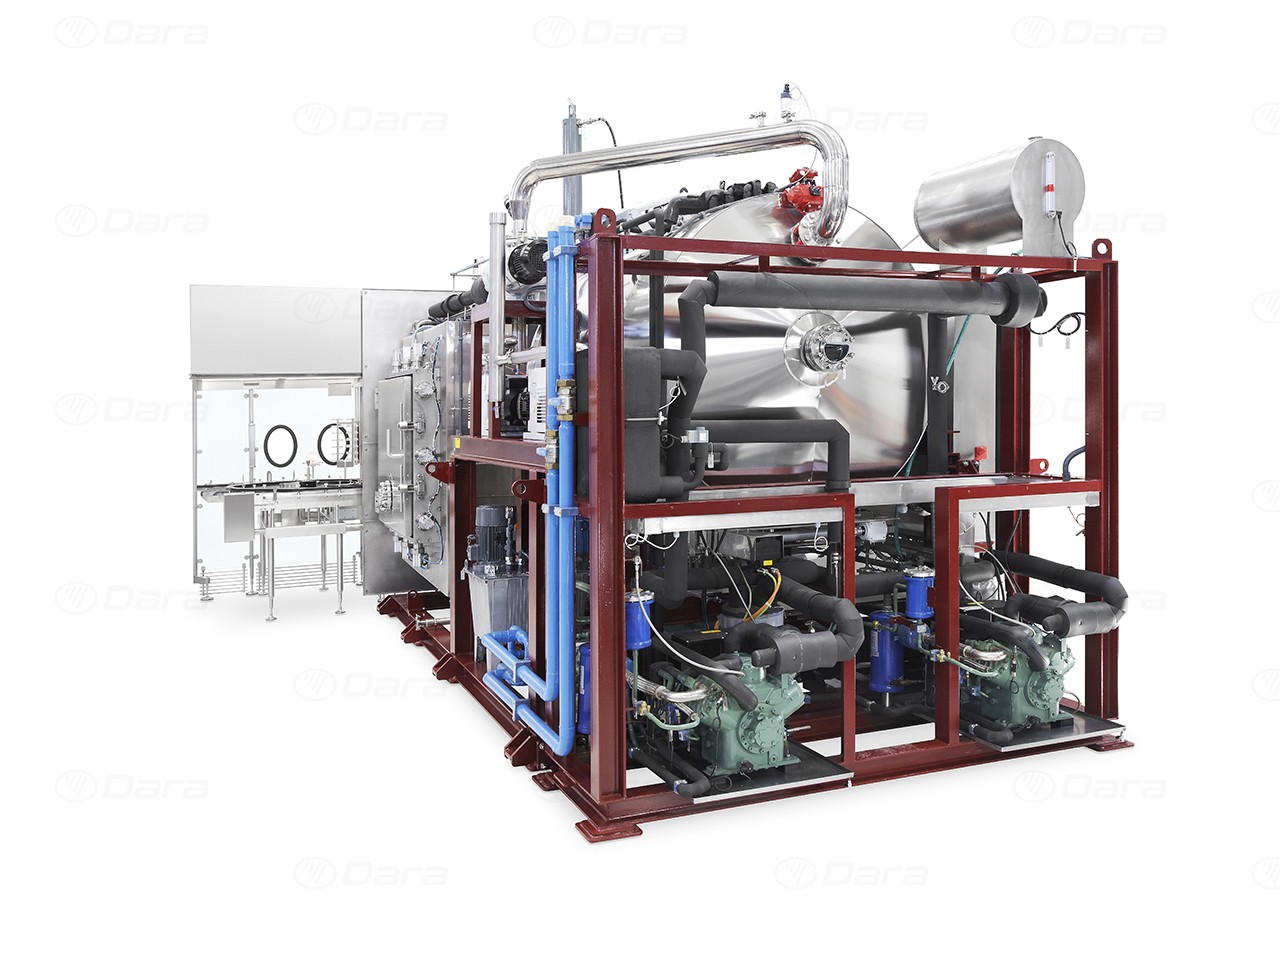 Automatic loading and unloading system for vials for lyophilizers